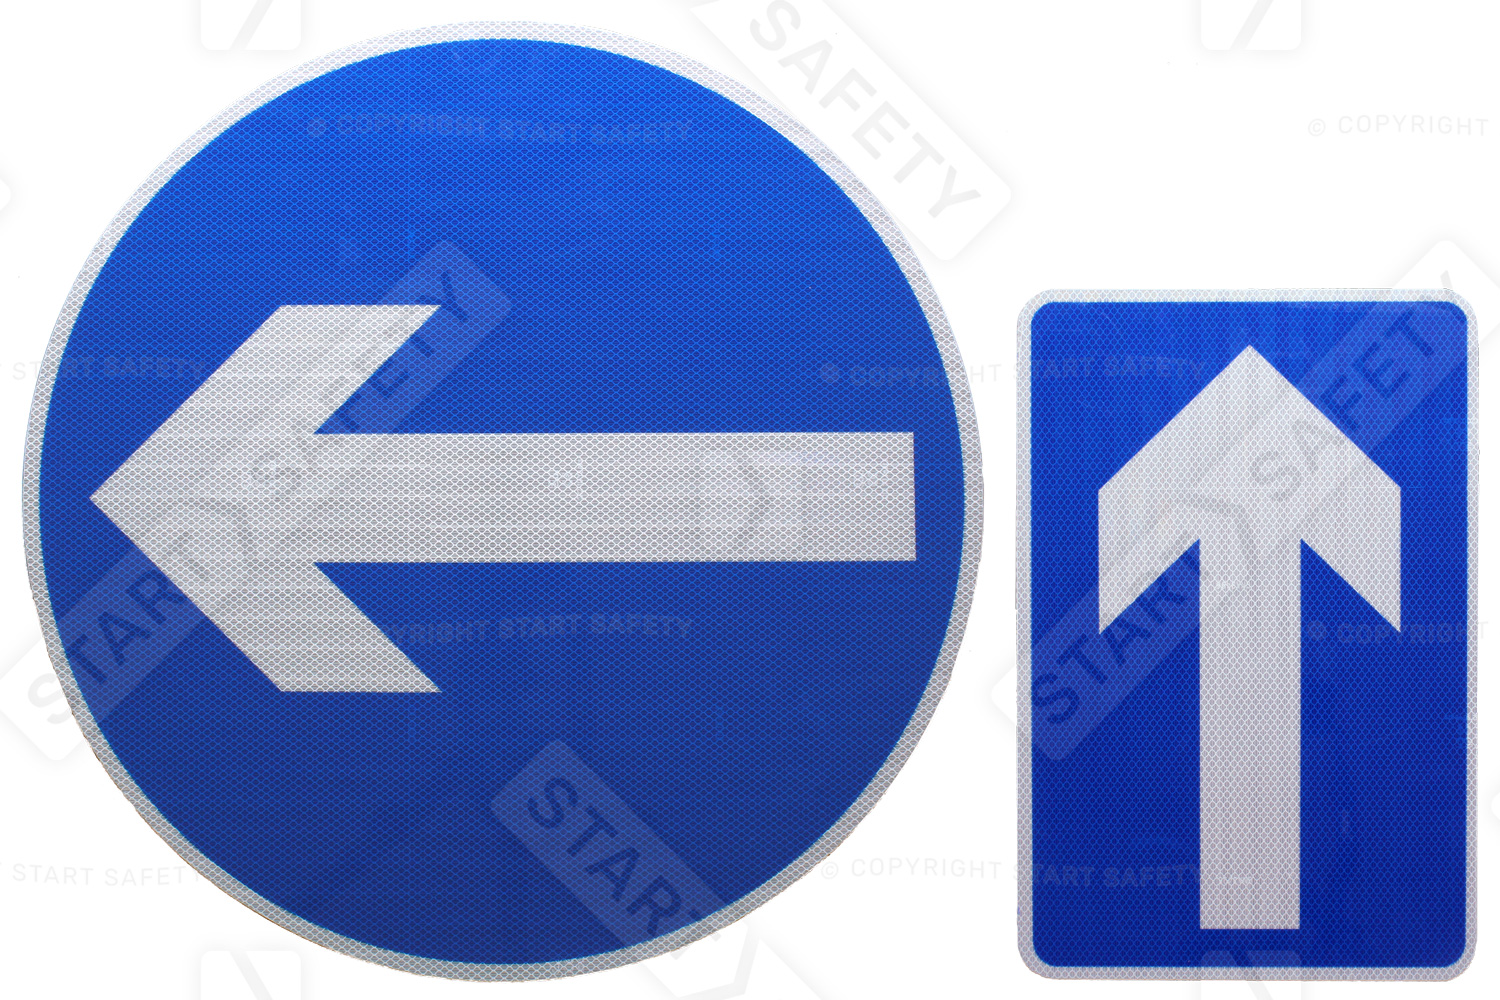 One way signs pointing left and forward